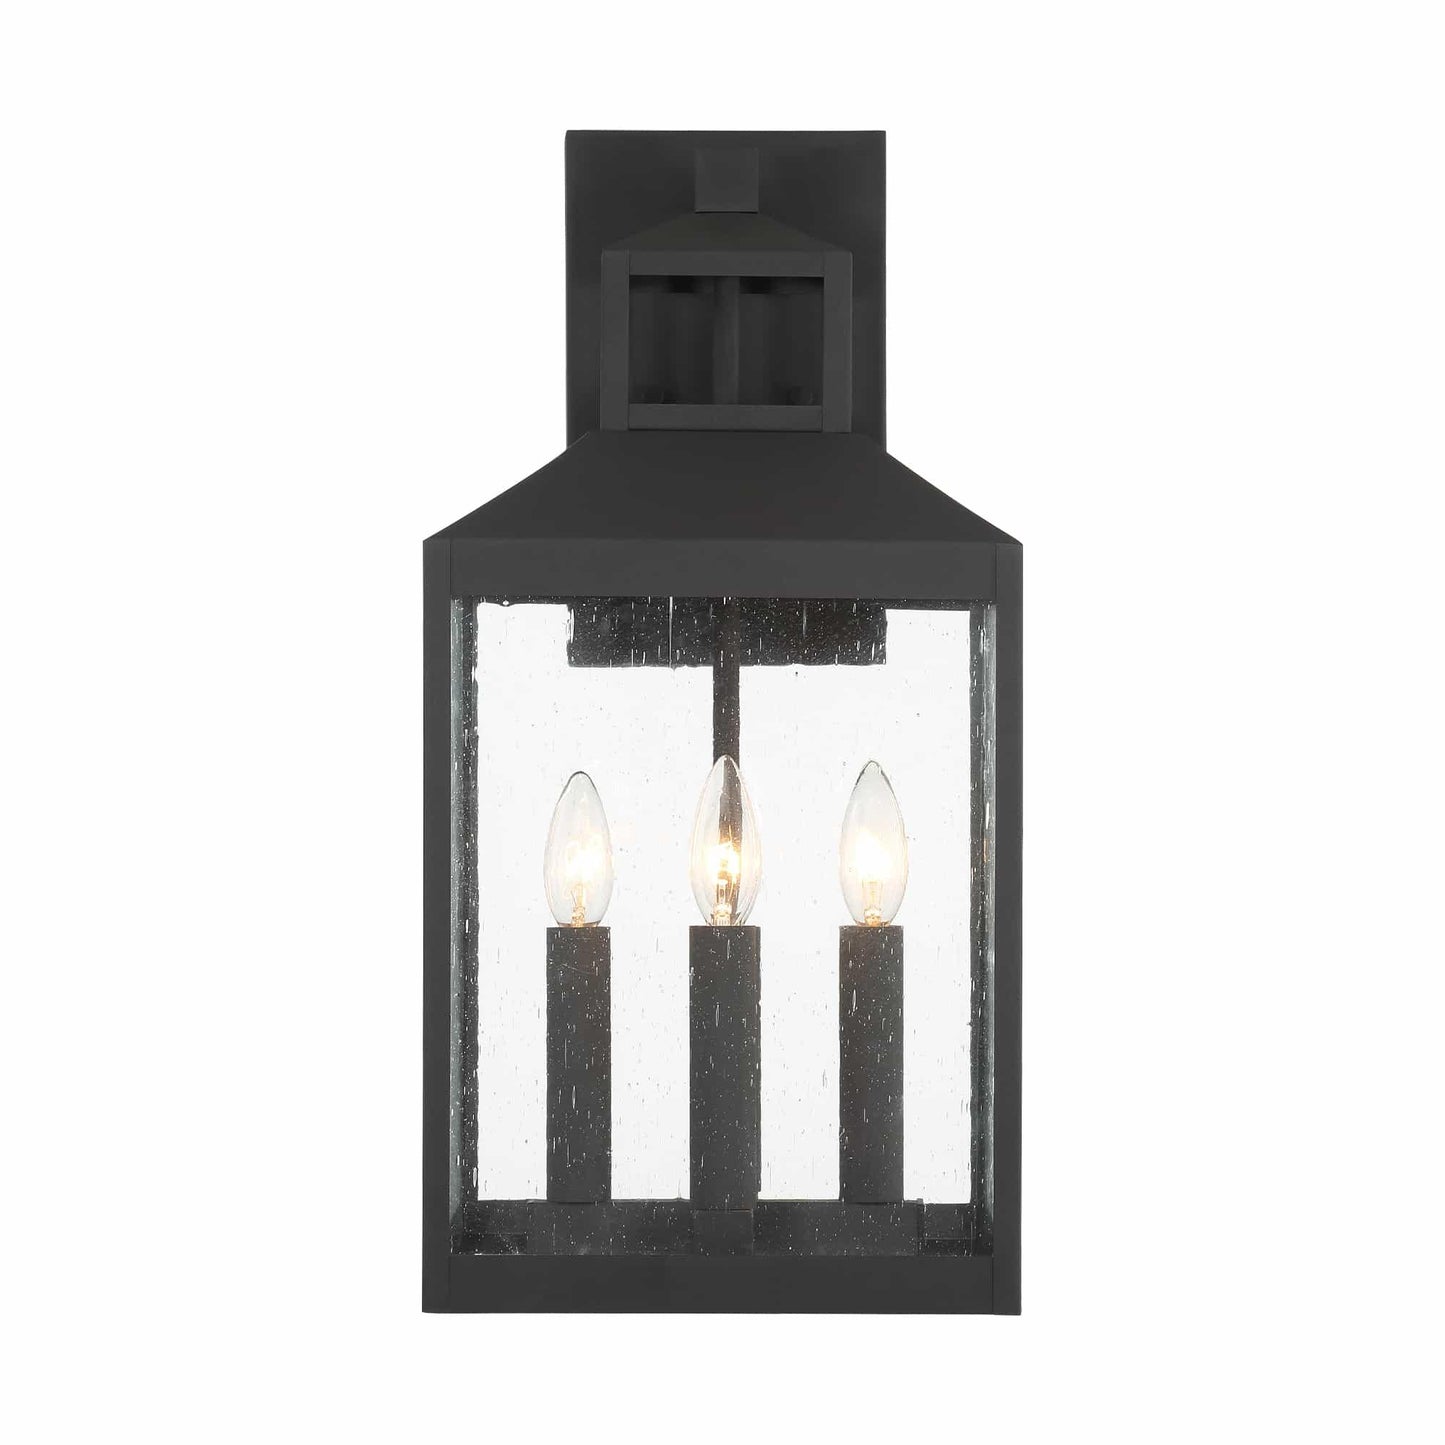 4 light outdoor lantern wall sconce (11) by ACROMA